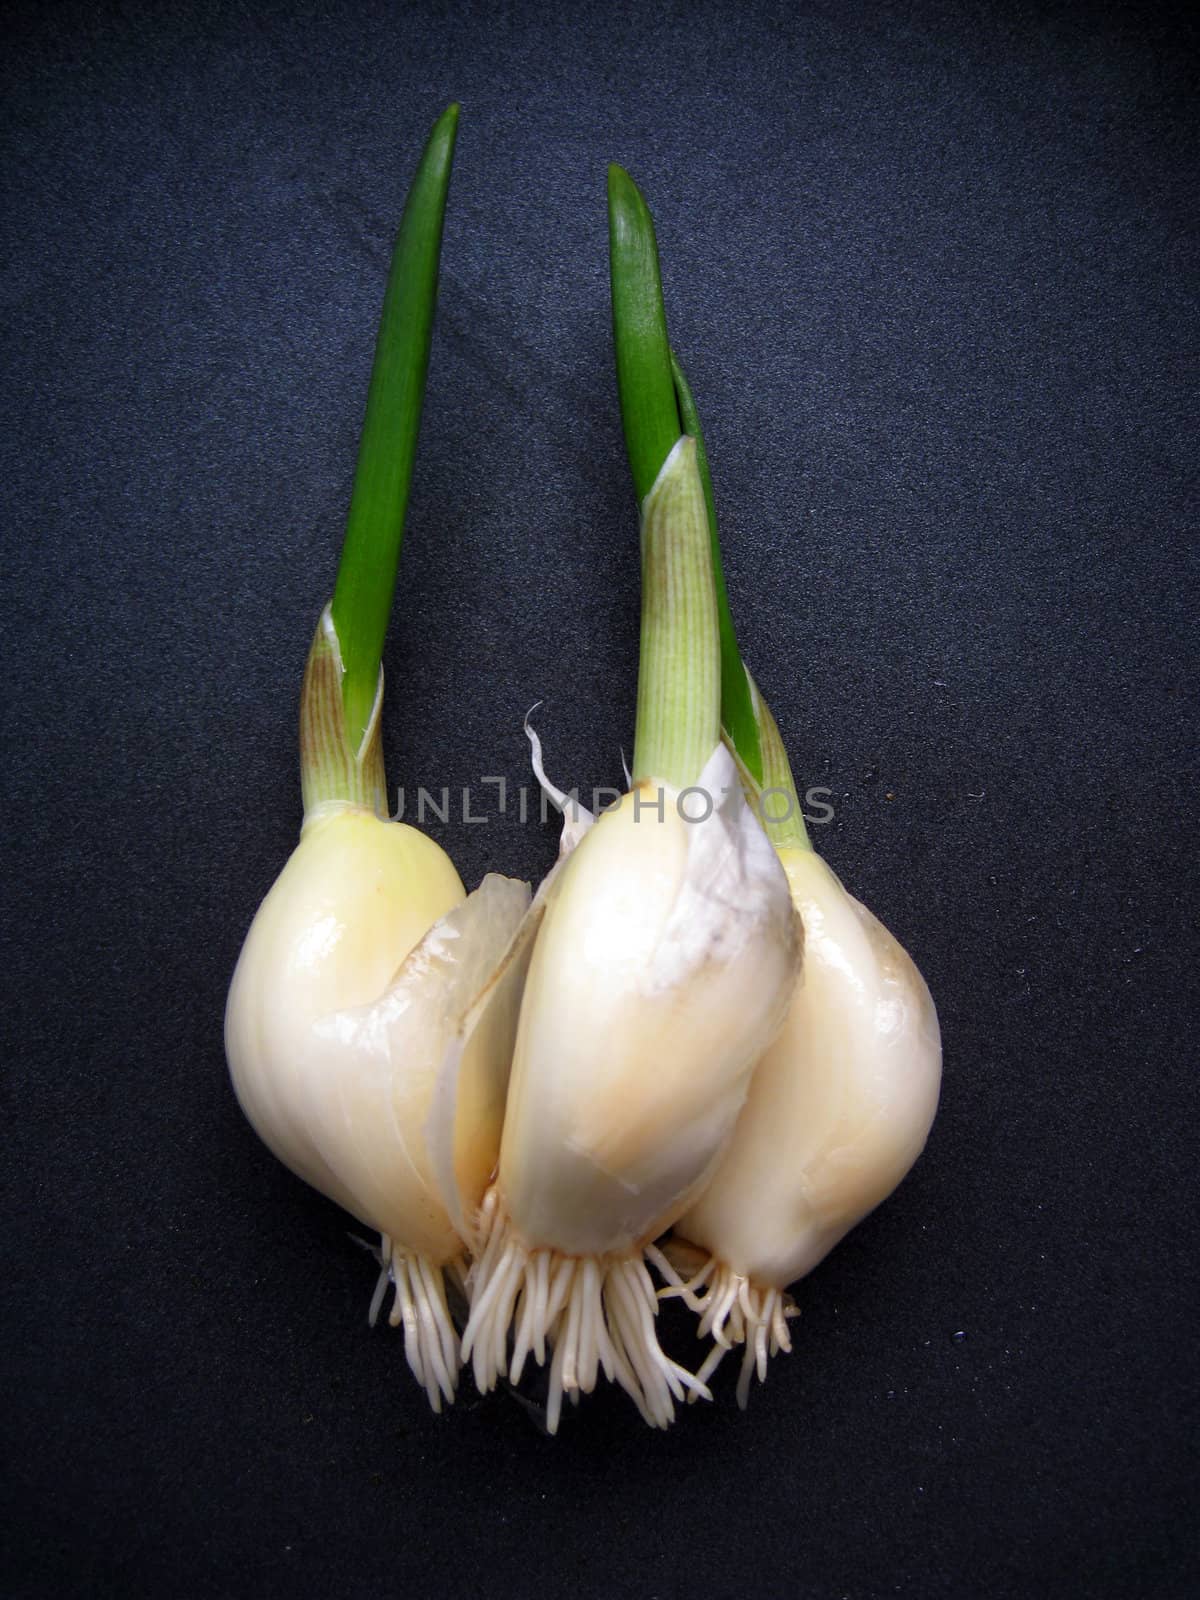 a top view of a growing garlic sprout